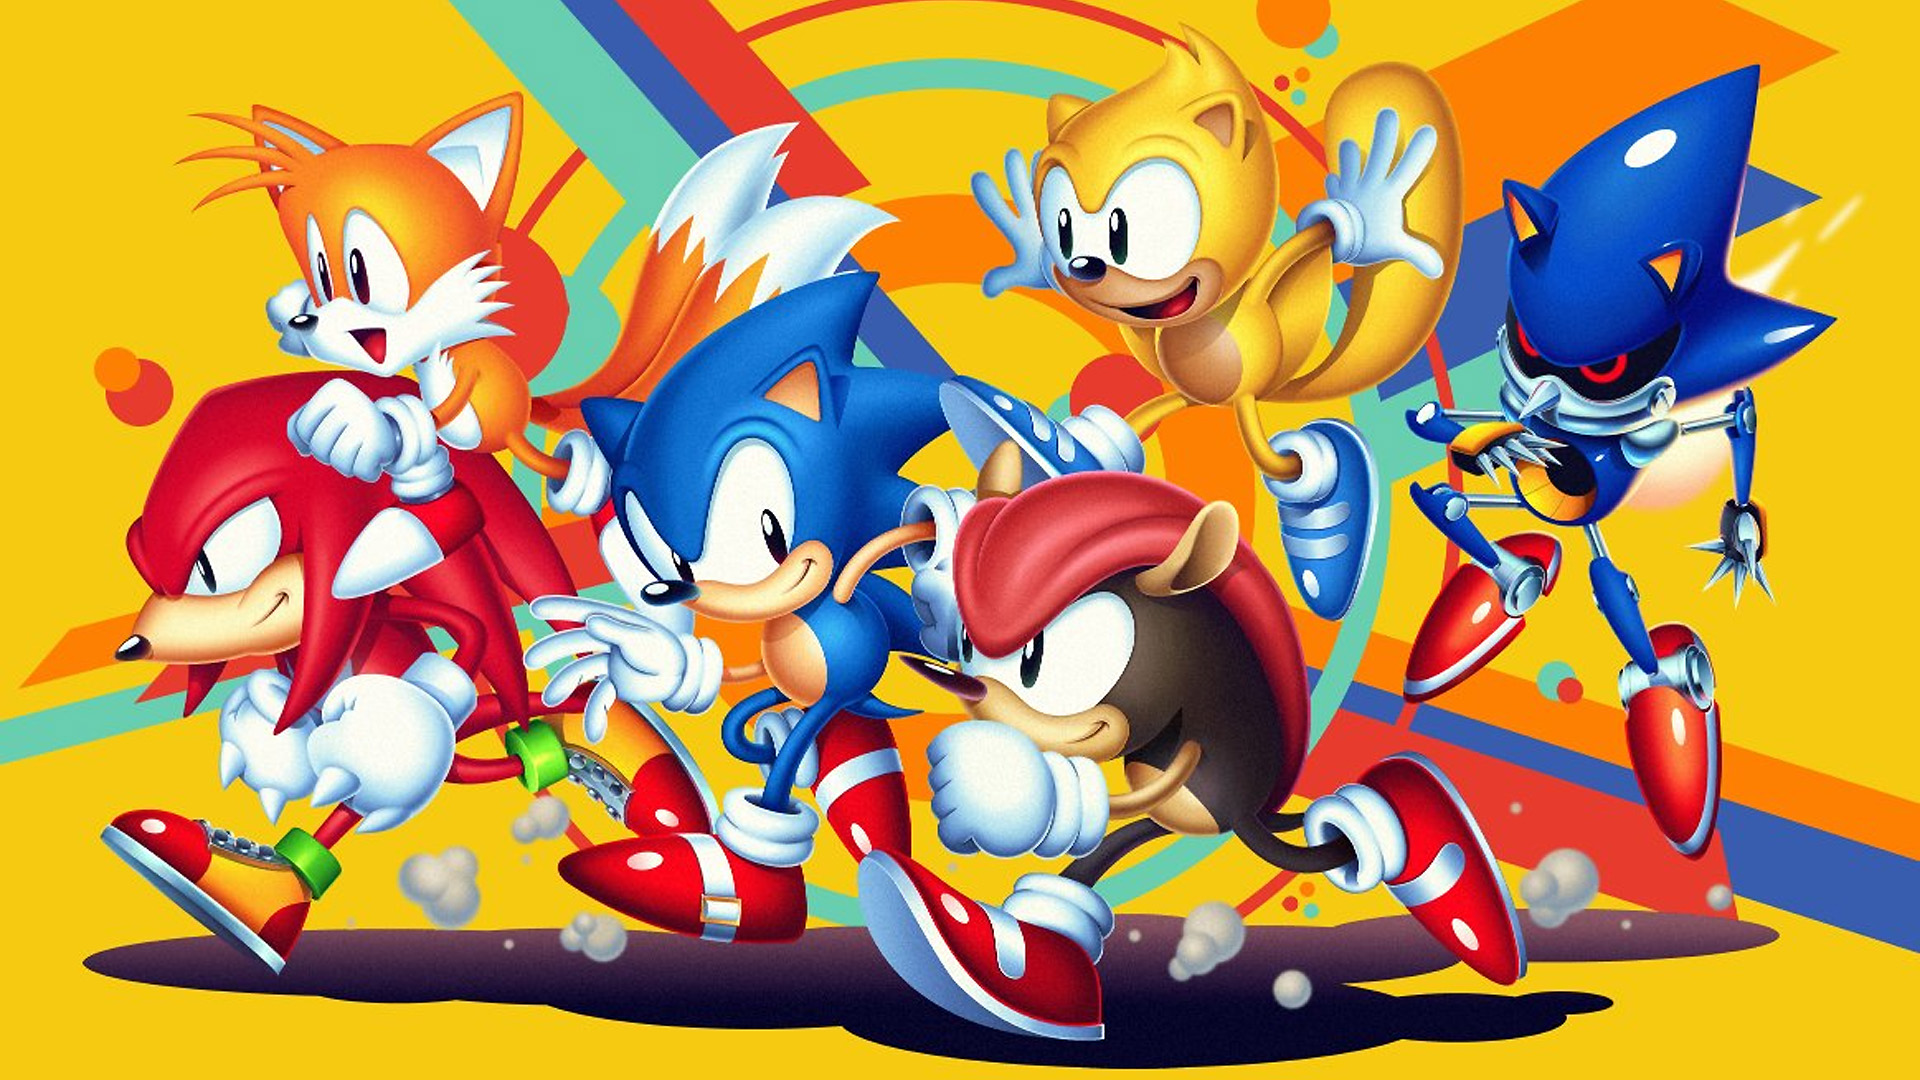 Sonic Superstars Announced For Consoles & PC; New 2D Sonic Game